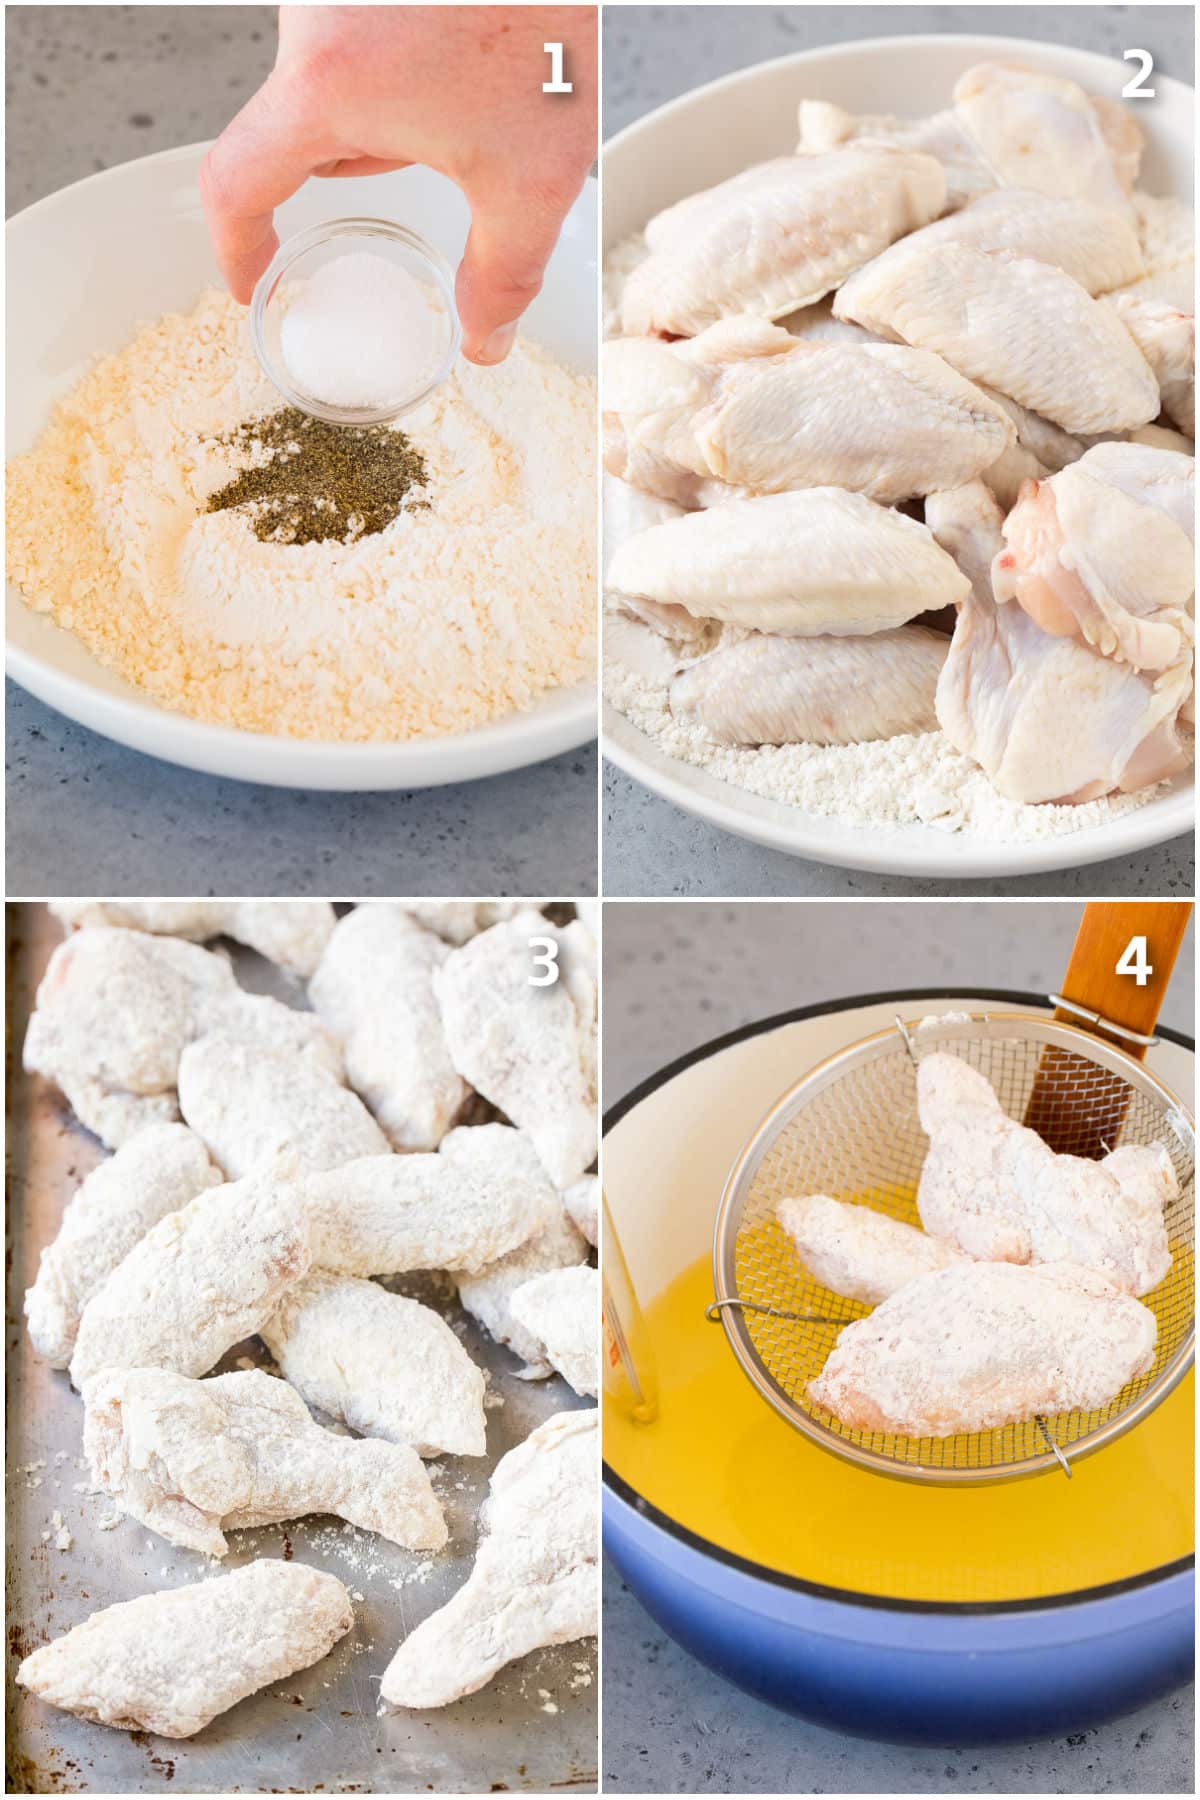 Step by step shots showing how to bread and fry chicken wings.